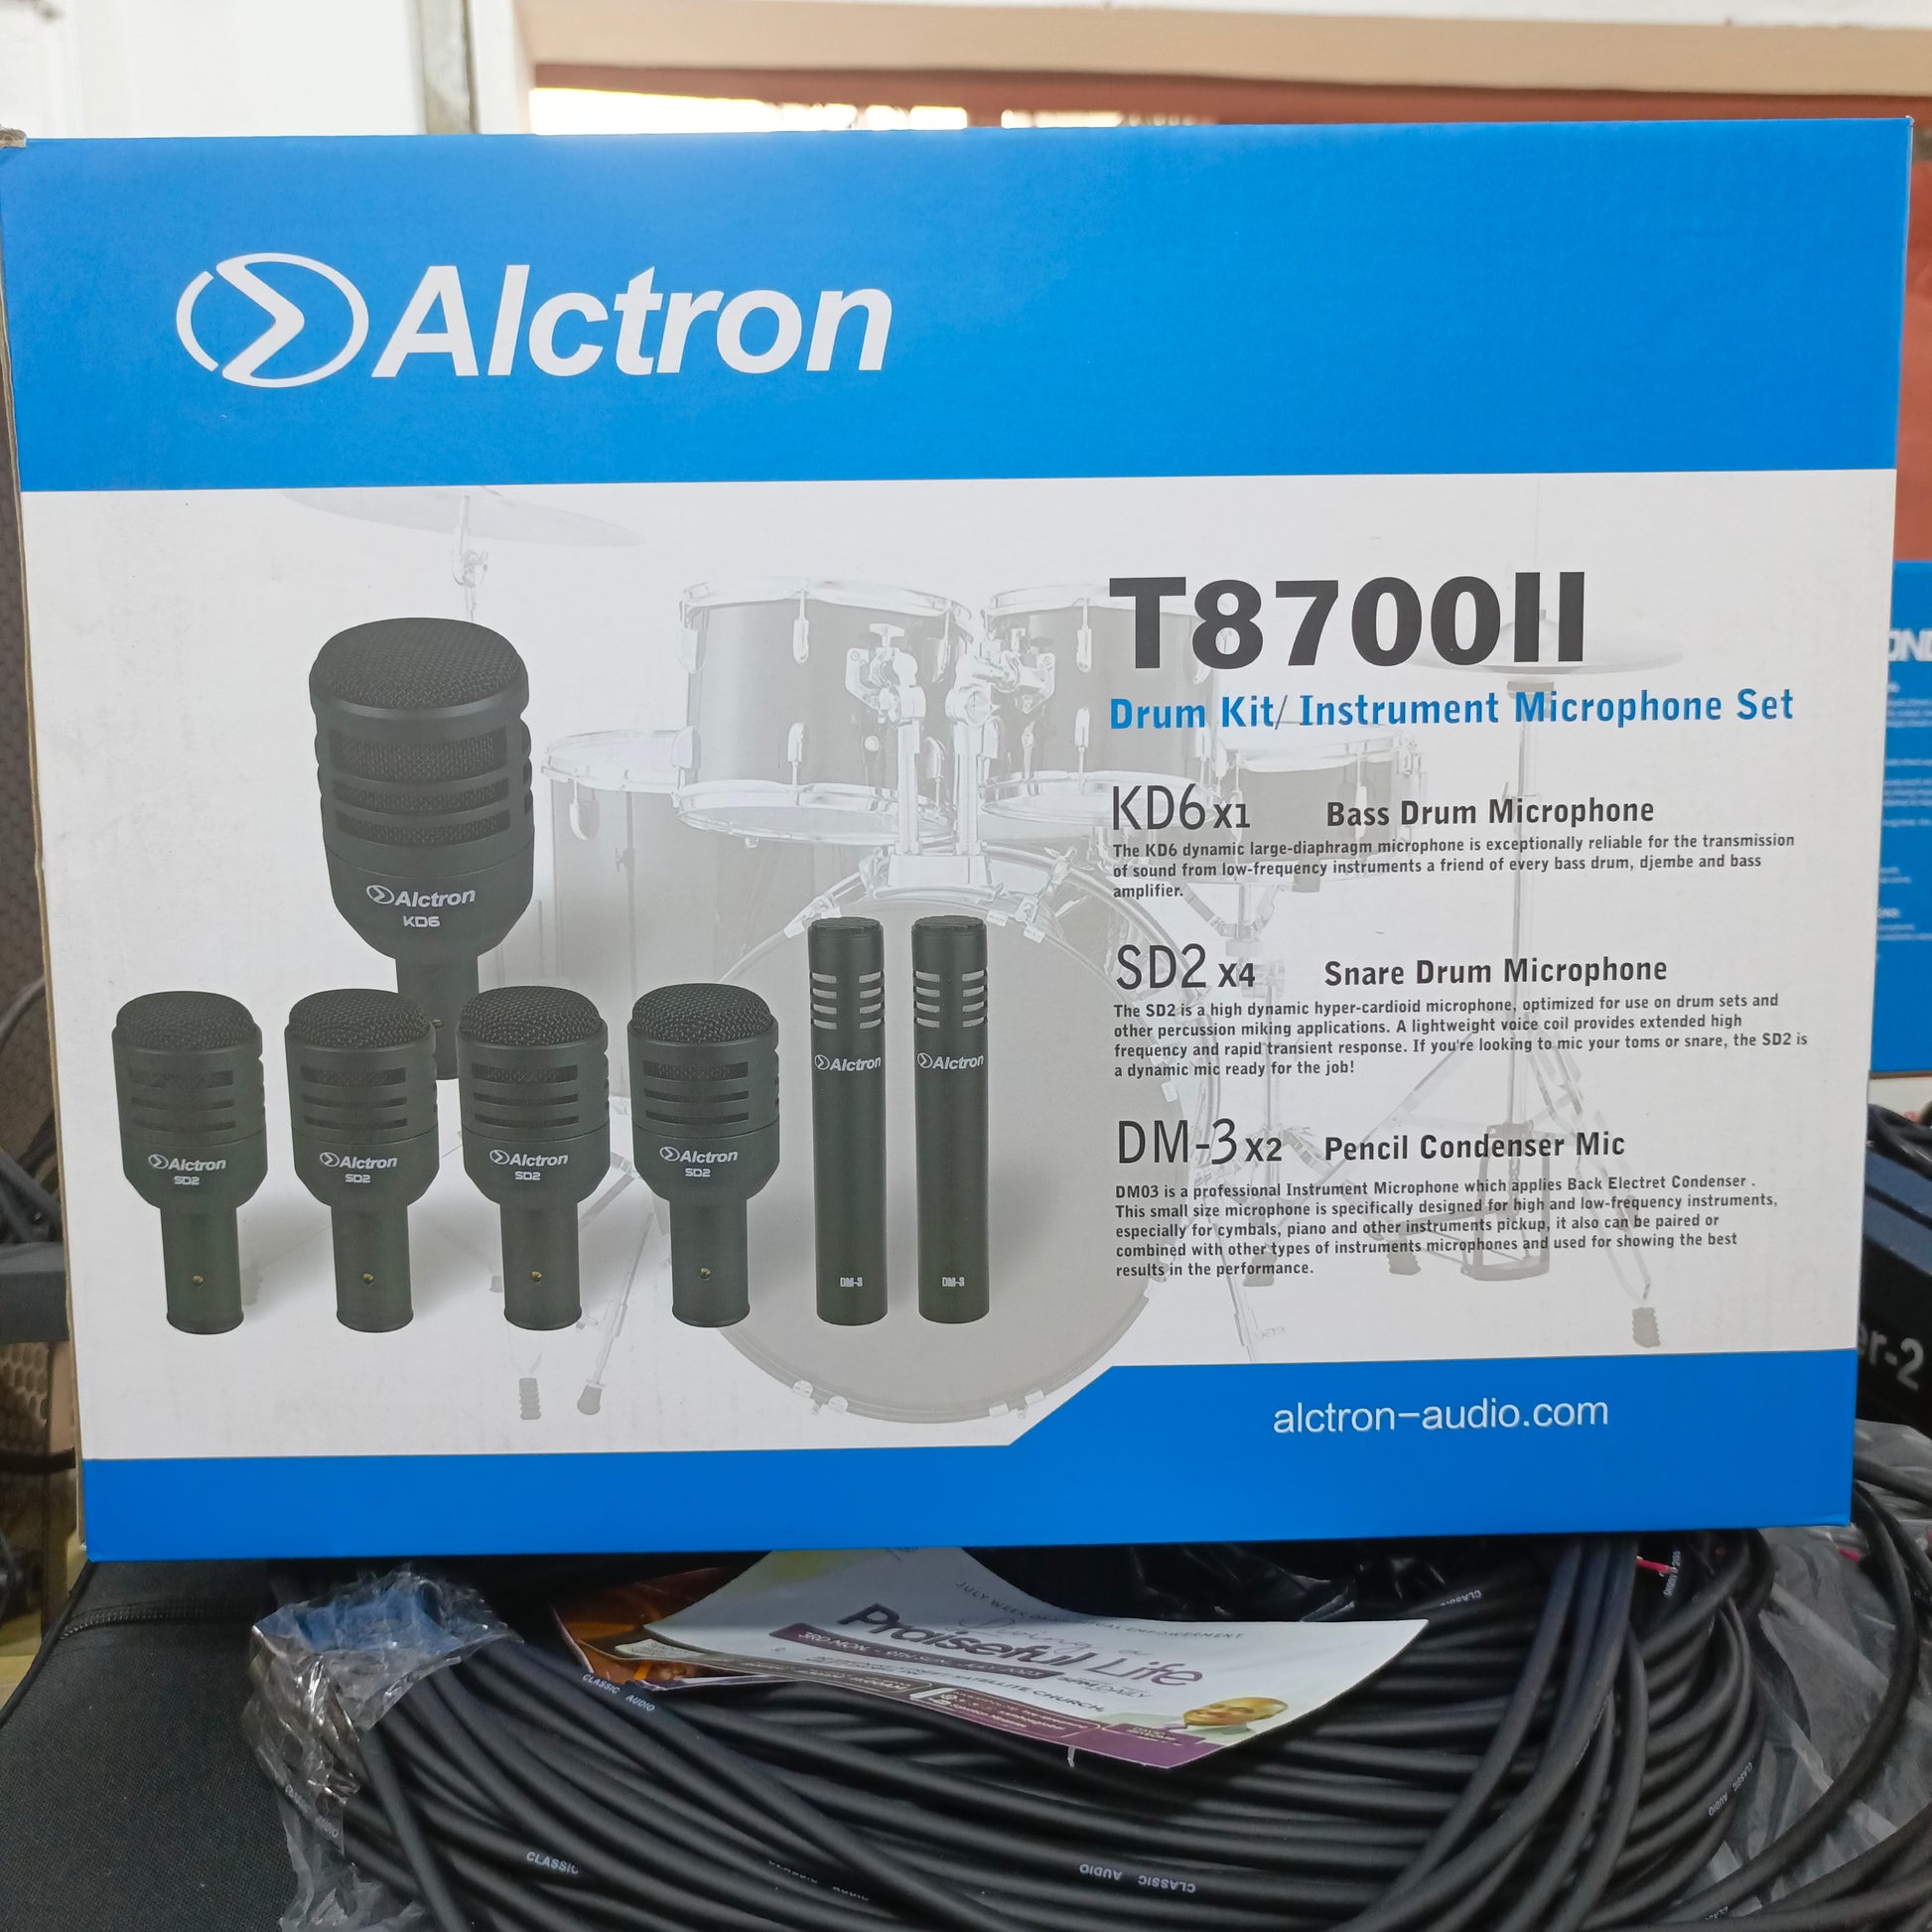 Alctron T8700II 7-Piece Drum/Instruments Microphone Set for Bass/ Snare/ Tom/ Hi-HAT Cymbals, with Mic Holders and Carrying Case - Brand New